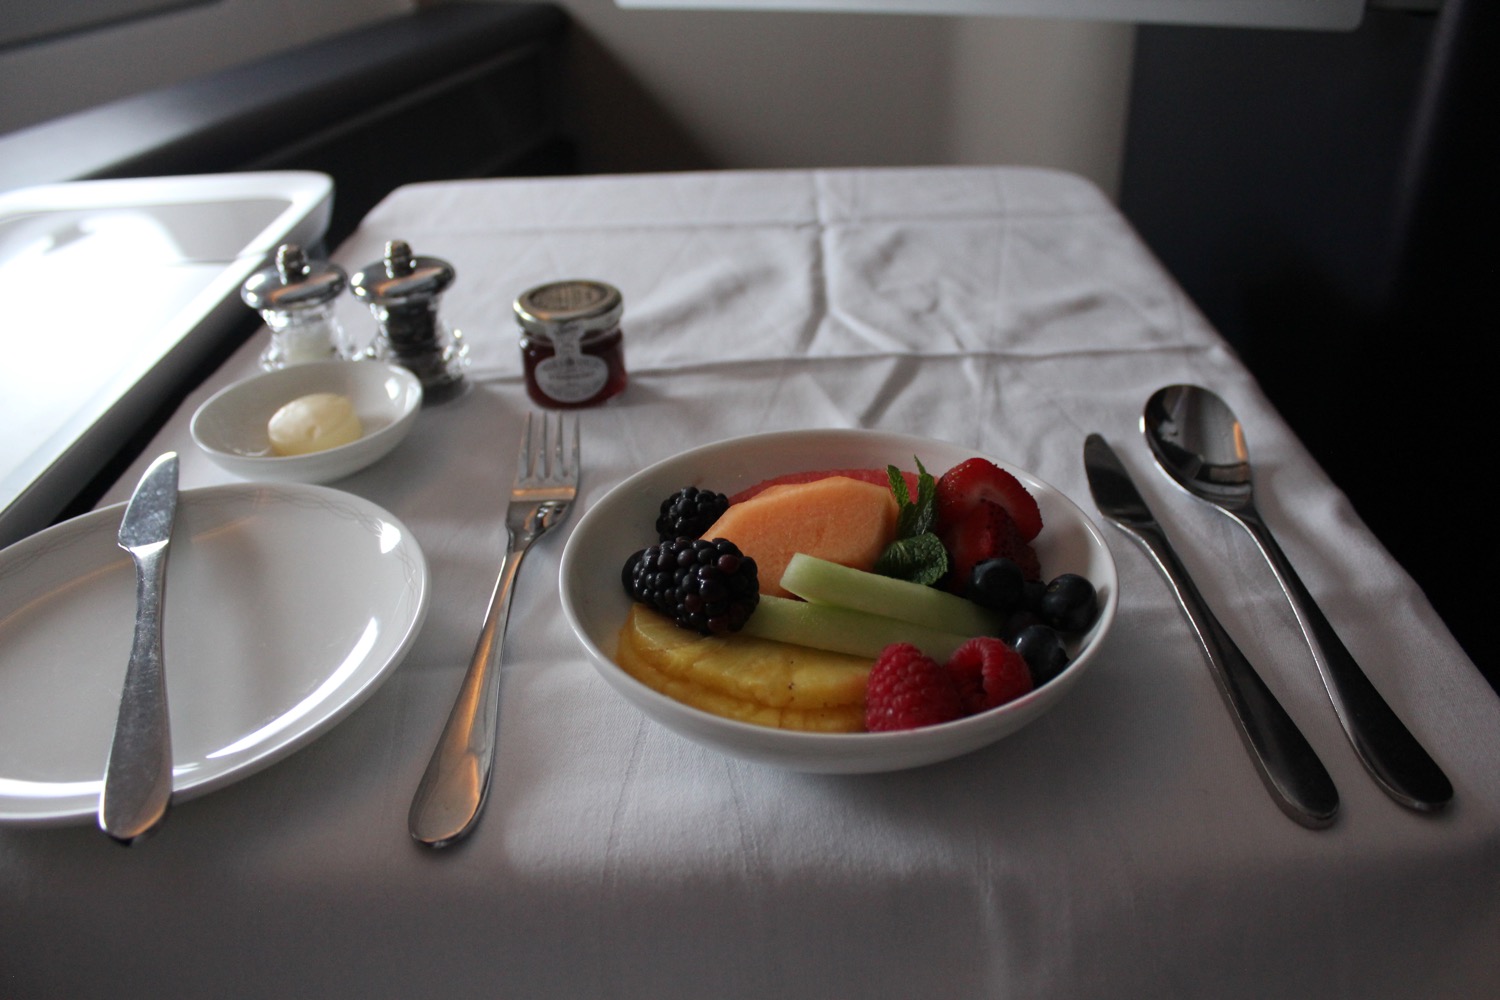 British Airways A380 First Class Review - 37